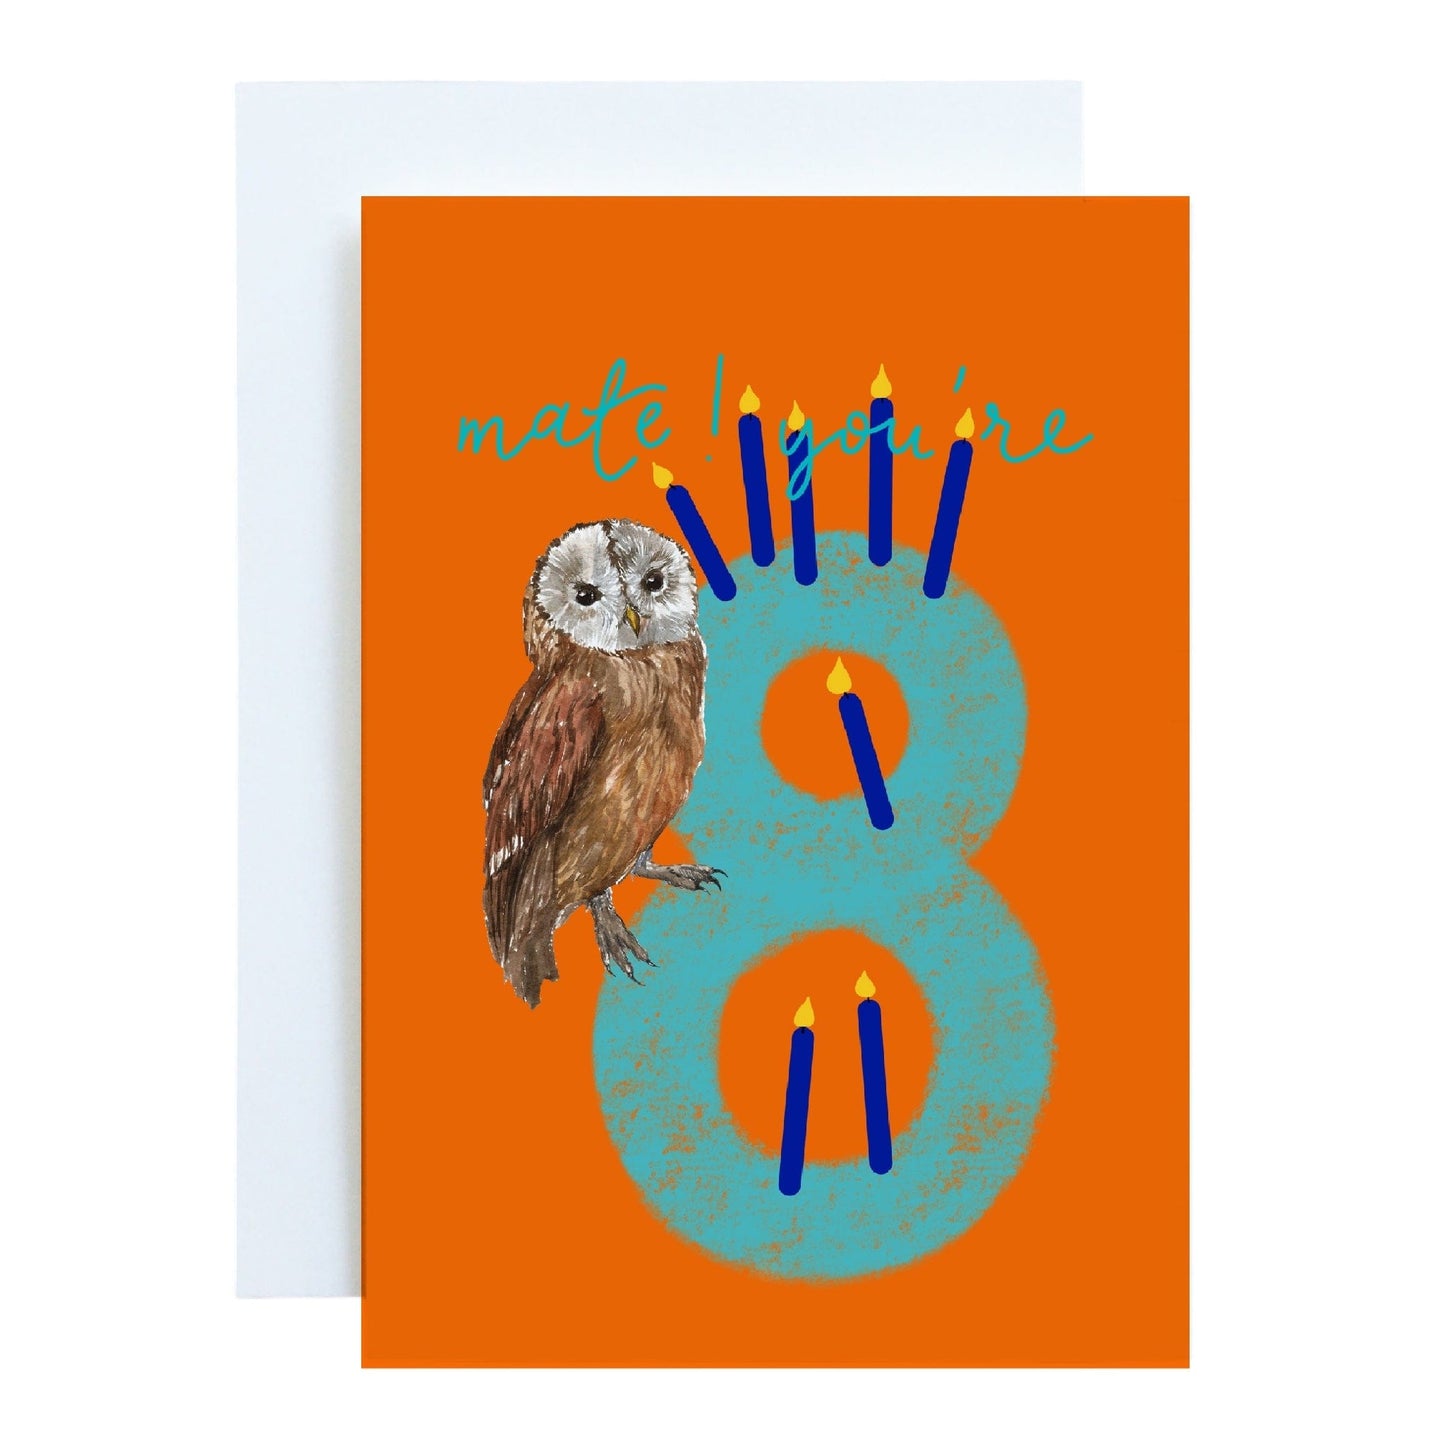 8 - Eighth birthday Card - Bright “Mate! You’re 8” with owl Cards And Hope Designs   